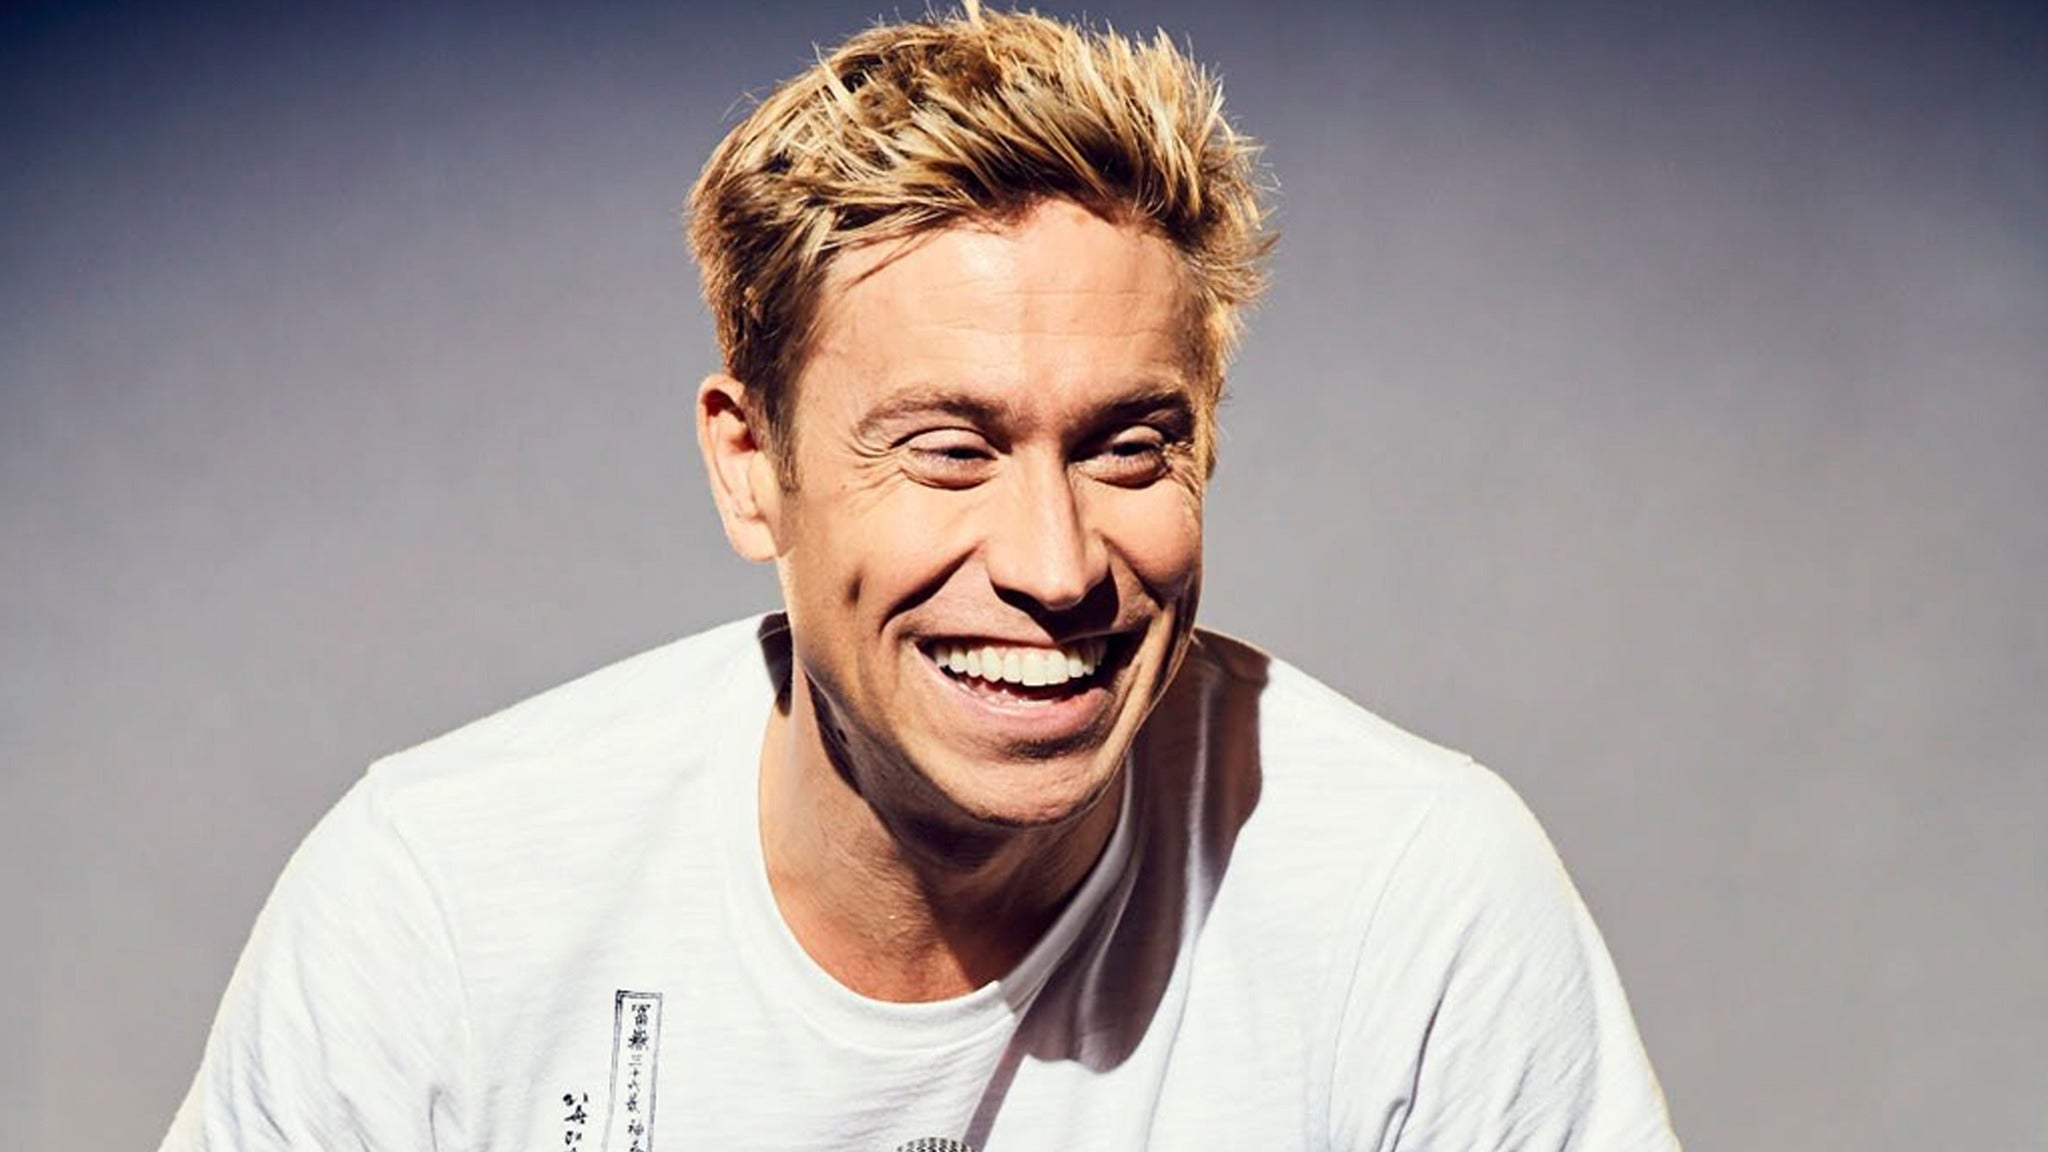 Russell Howard in Toronto promo photo for Various presale offer code